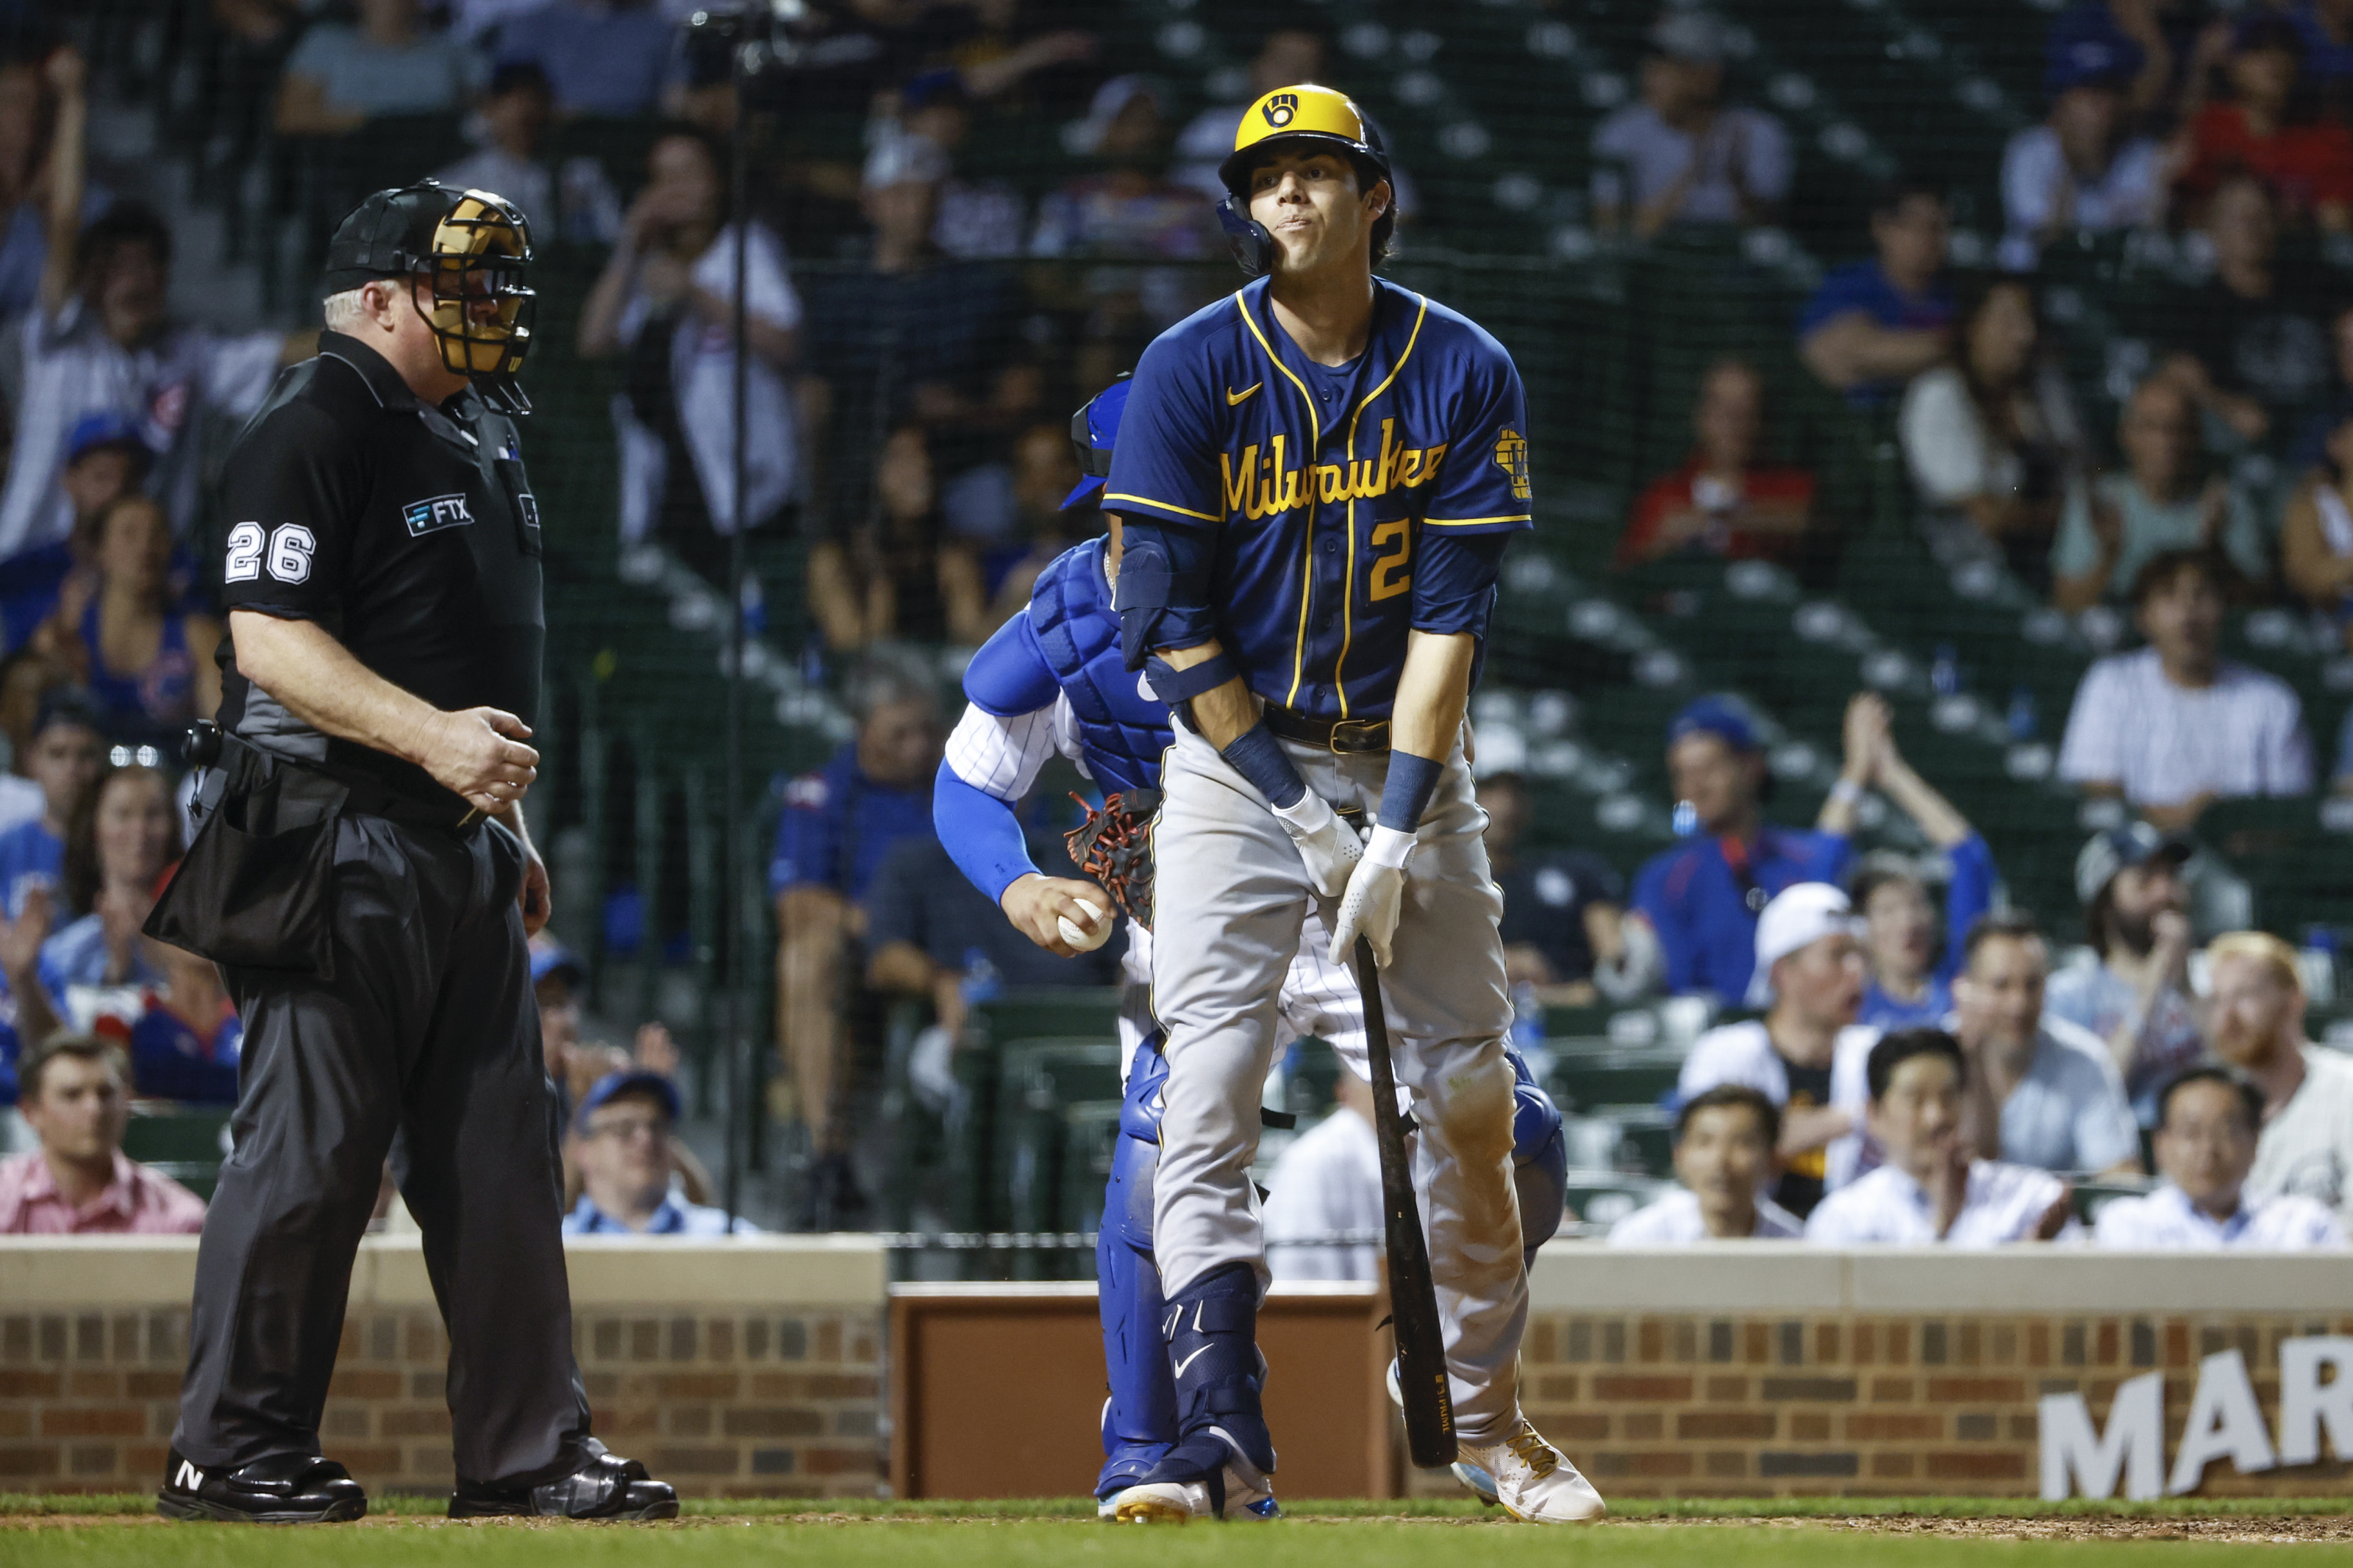 Brewers' Christian Yelich will undergo MRI on ailing back after hitting  'plateau' in recovery 